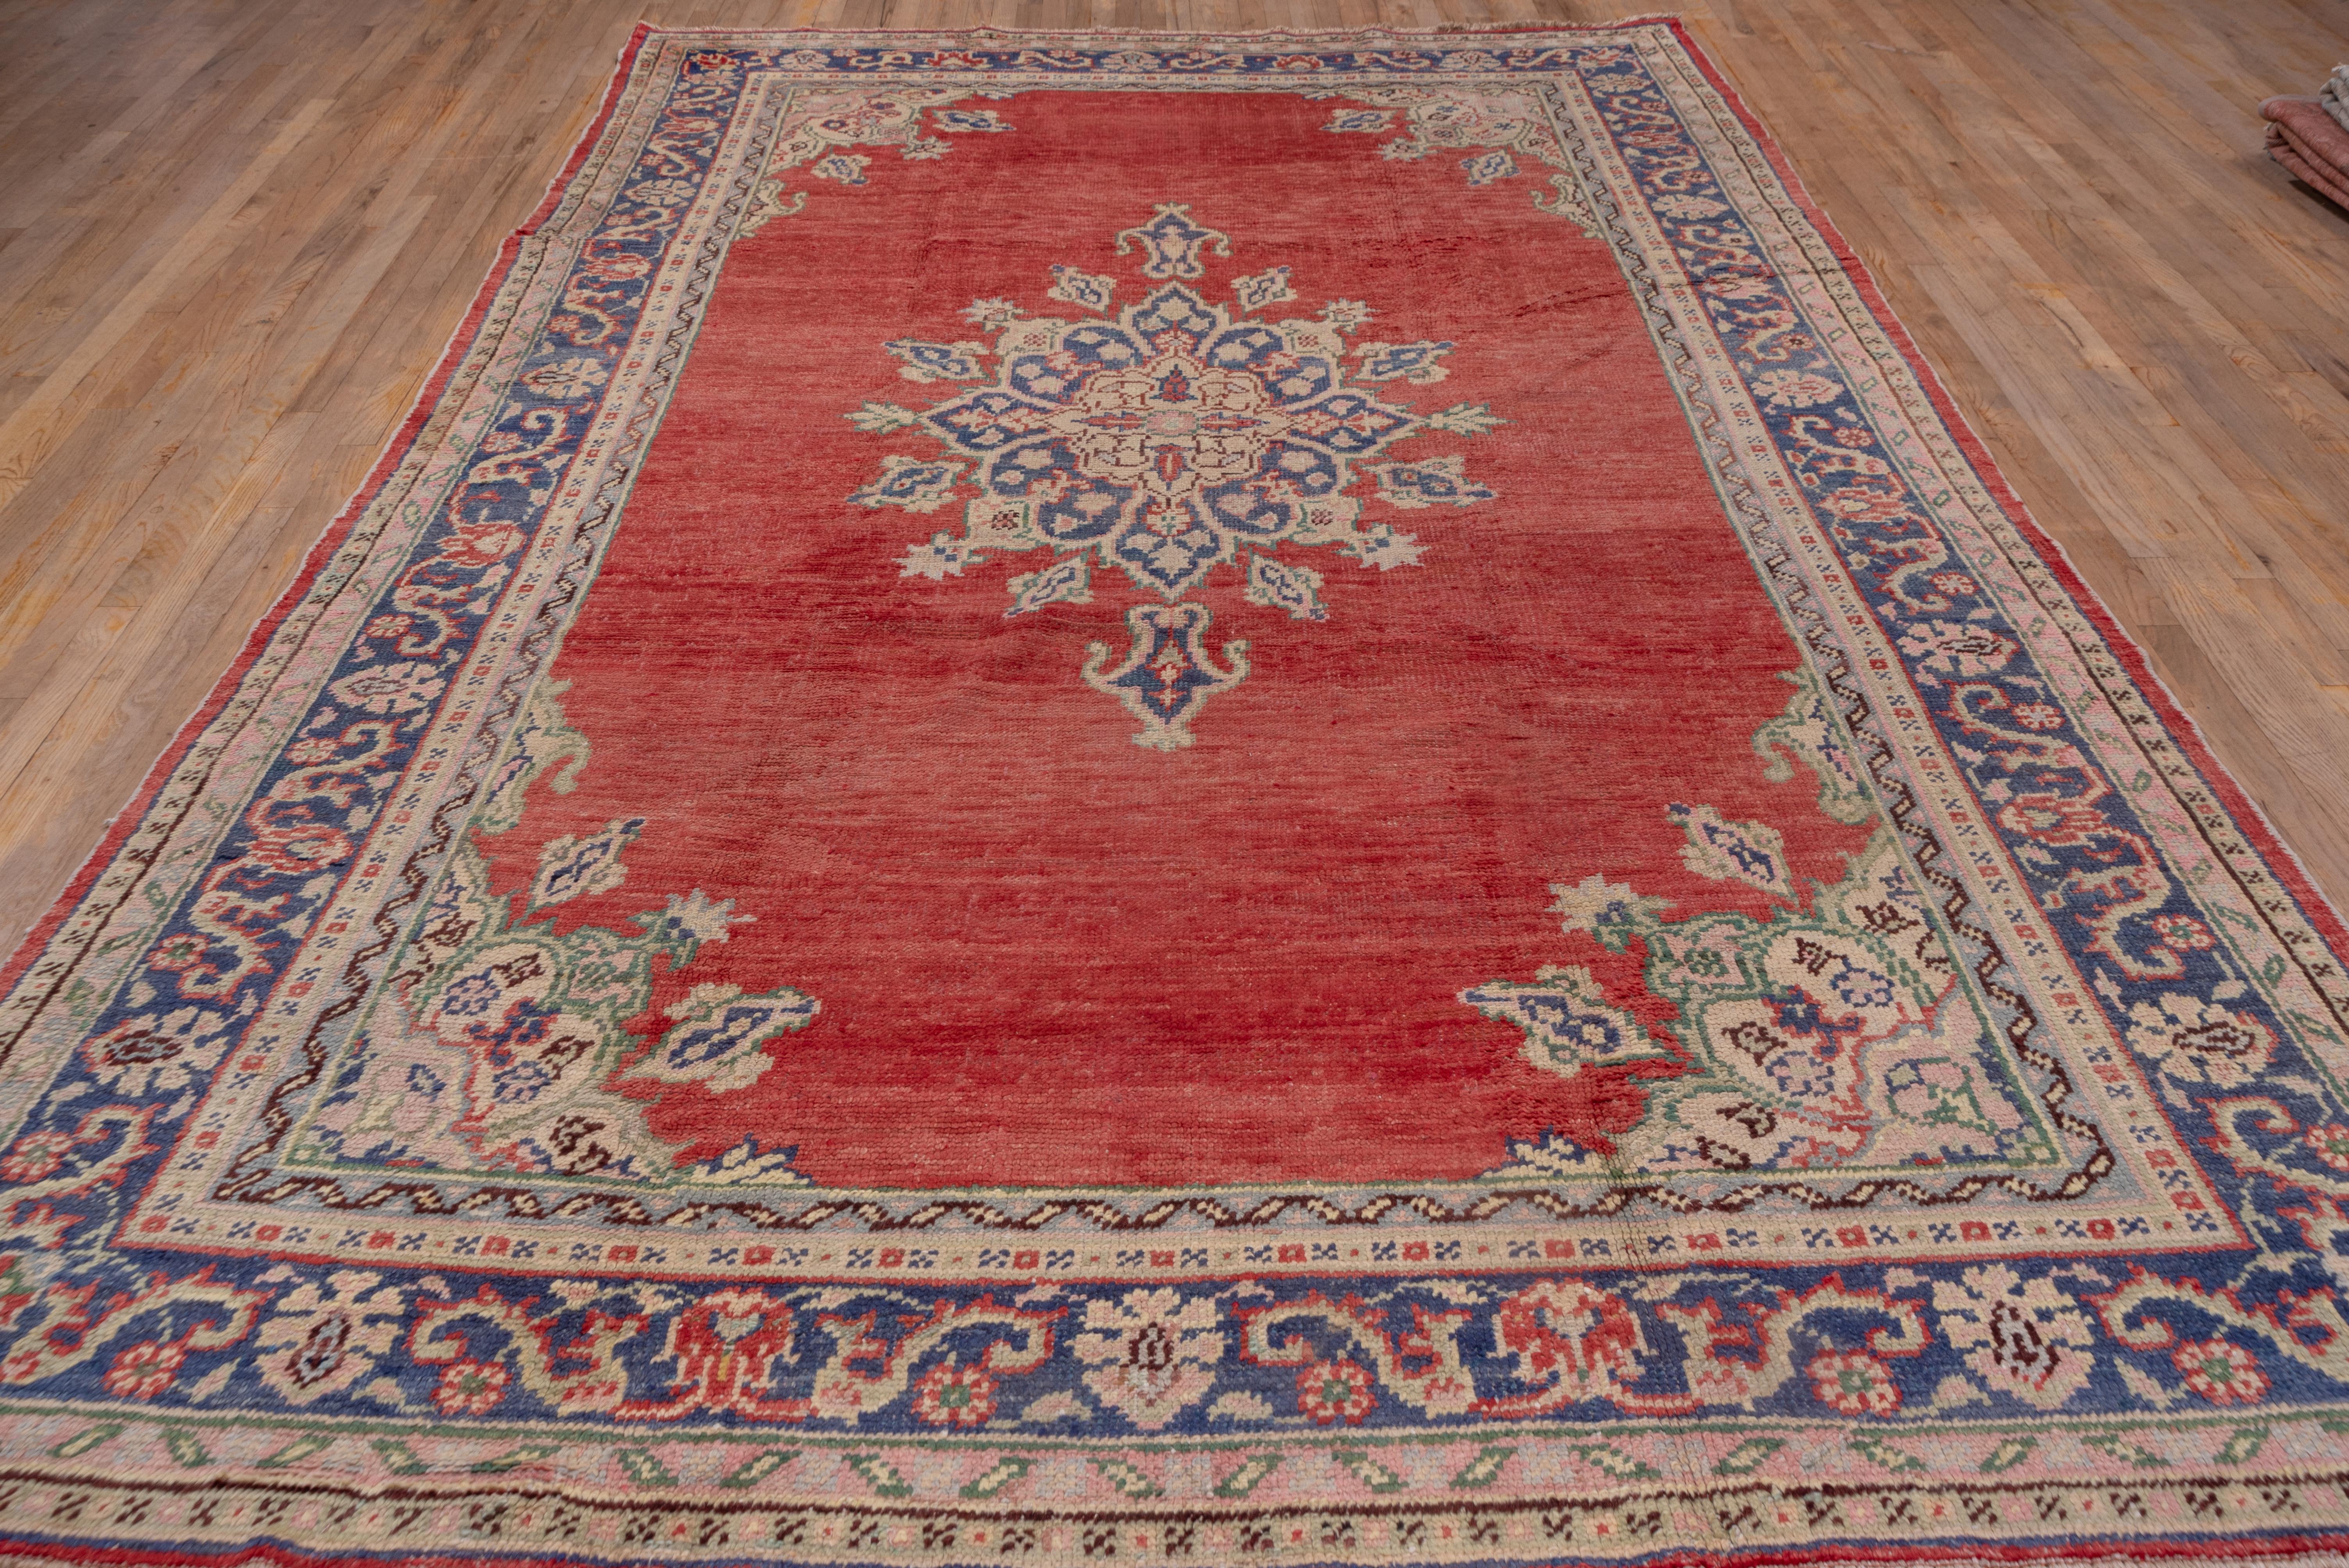 This west Anatolian town carpet shows a dramatic blue pendanted medallion with palmette periphery on an open red ground with sand corners and matching palmettes. The medium blue main border shows volute leaves and simple palmettes accented in pale